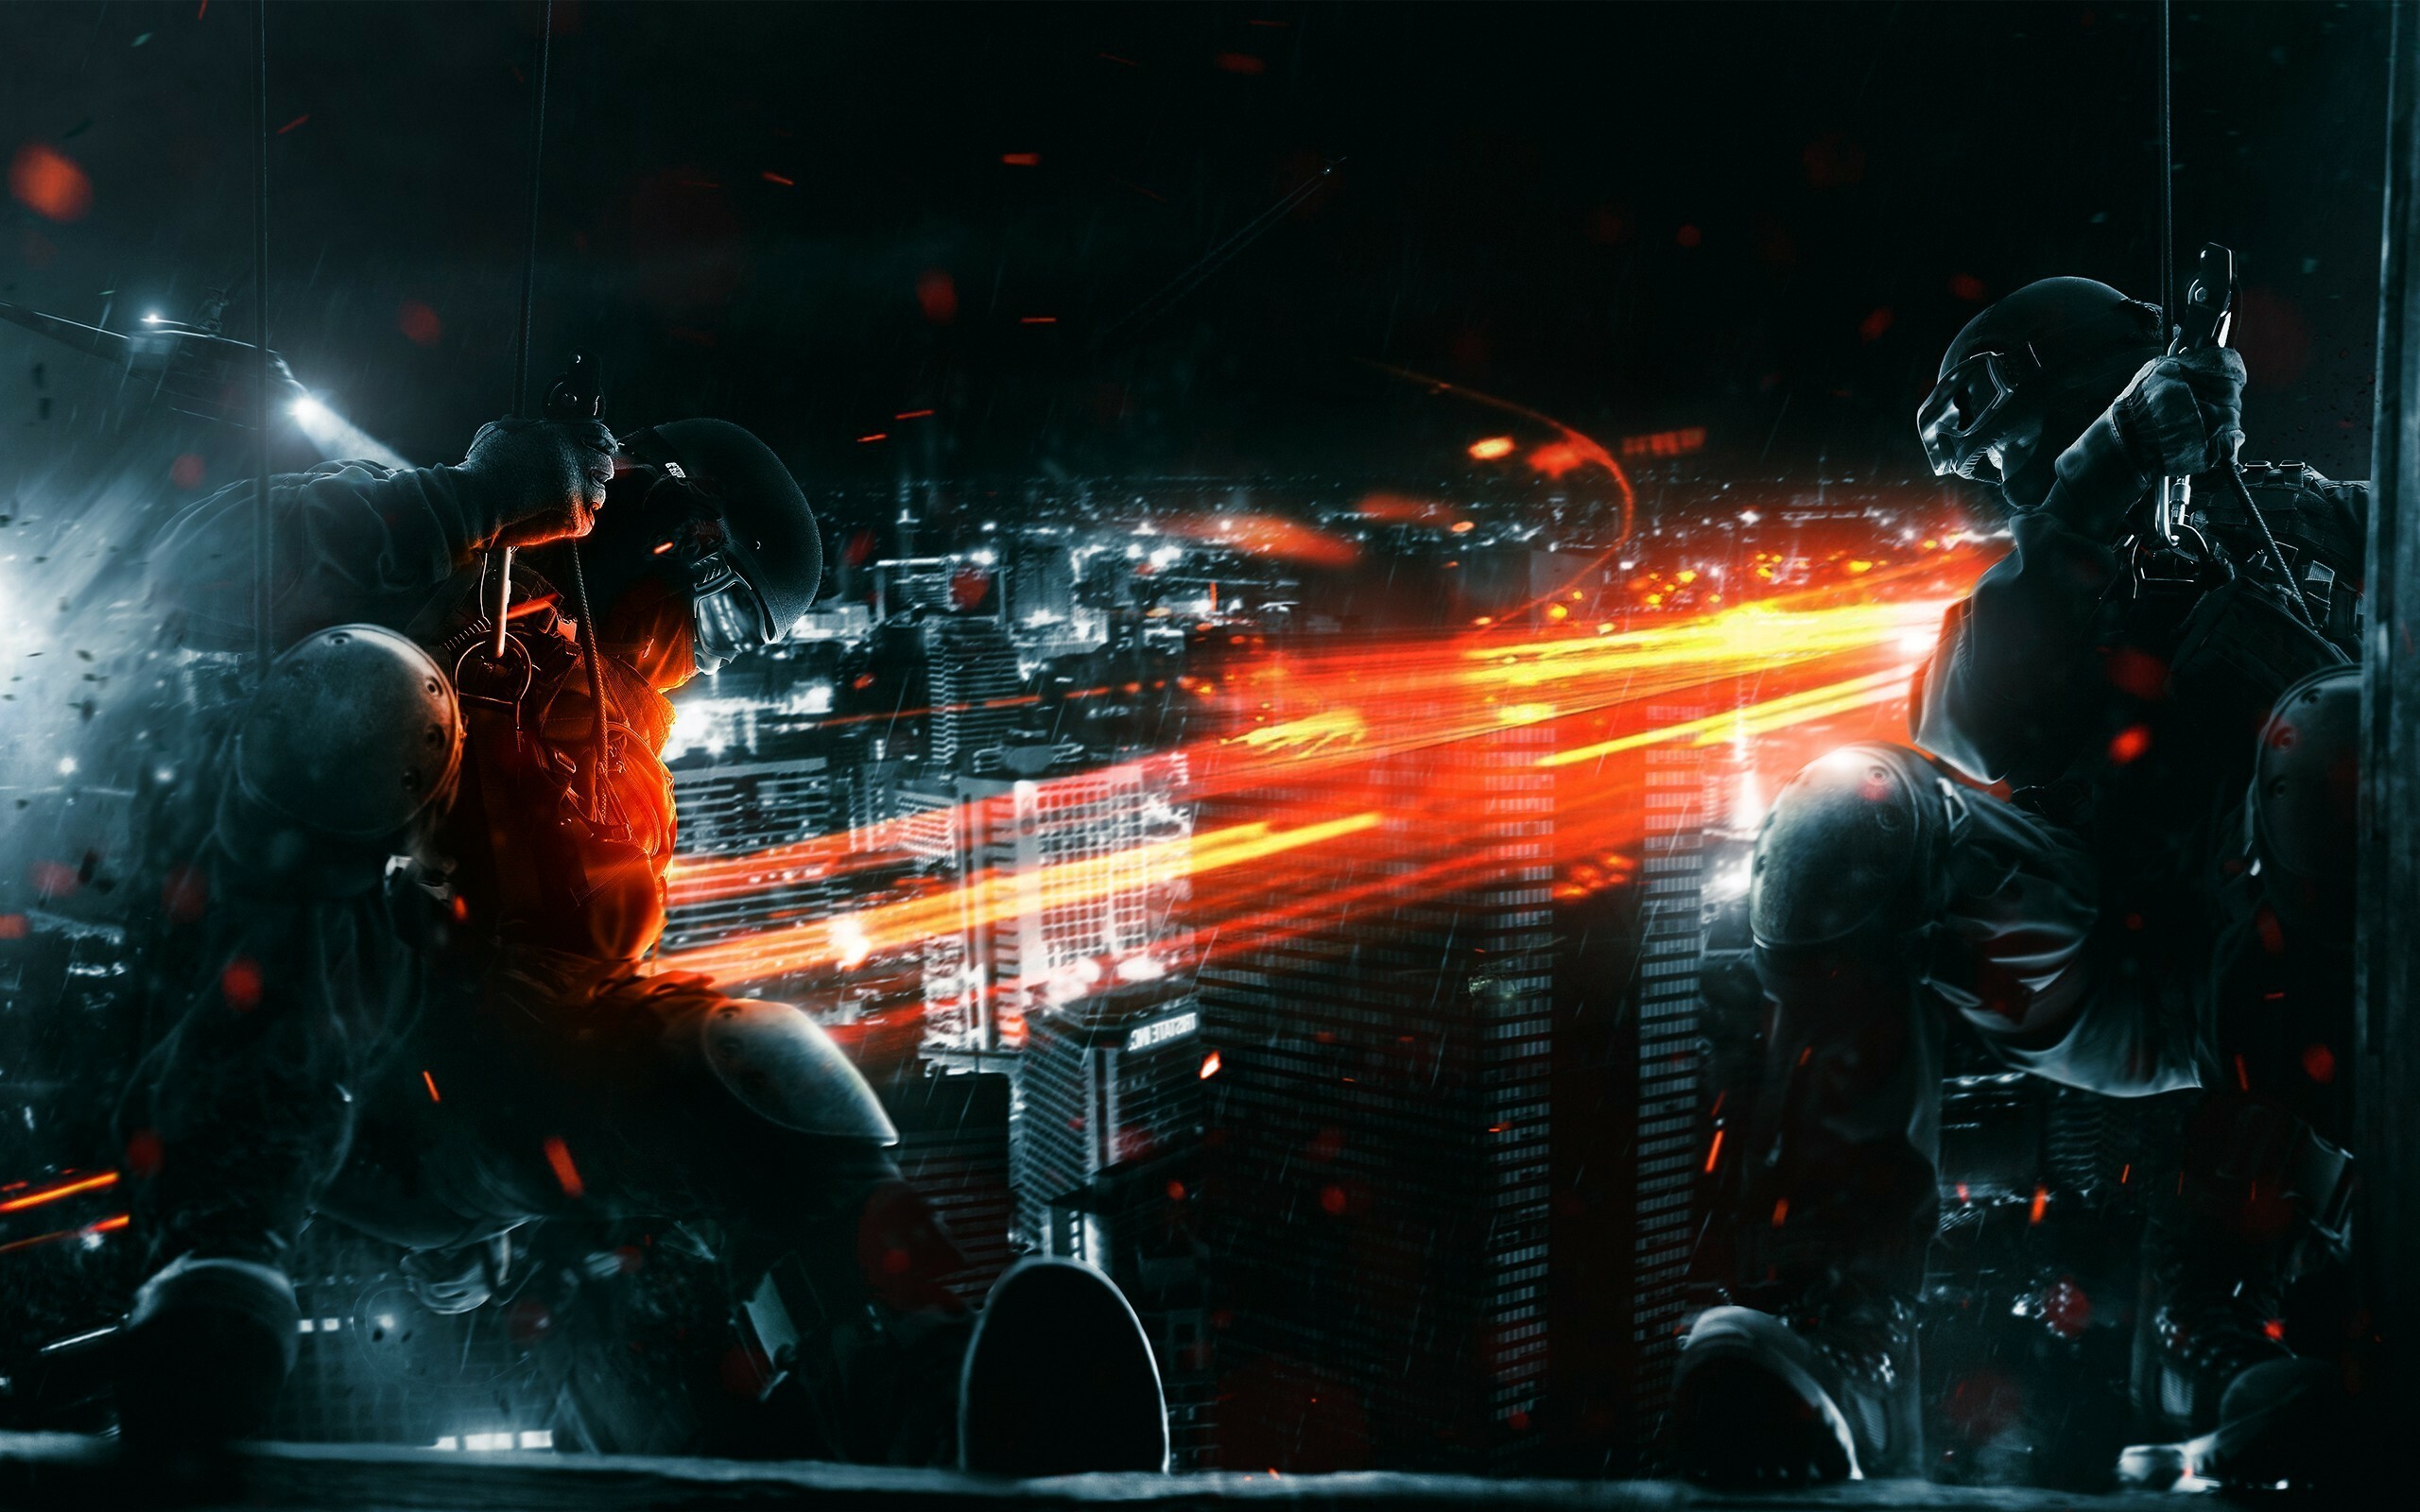 Battlefield 3: The twelfth installment of BF series, Developed by DICE. 2560x1600 HD Background.